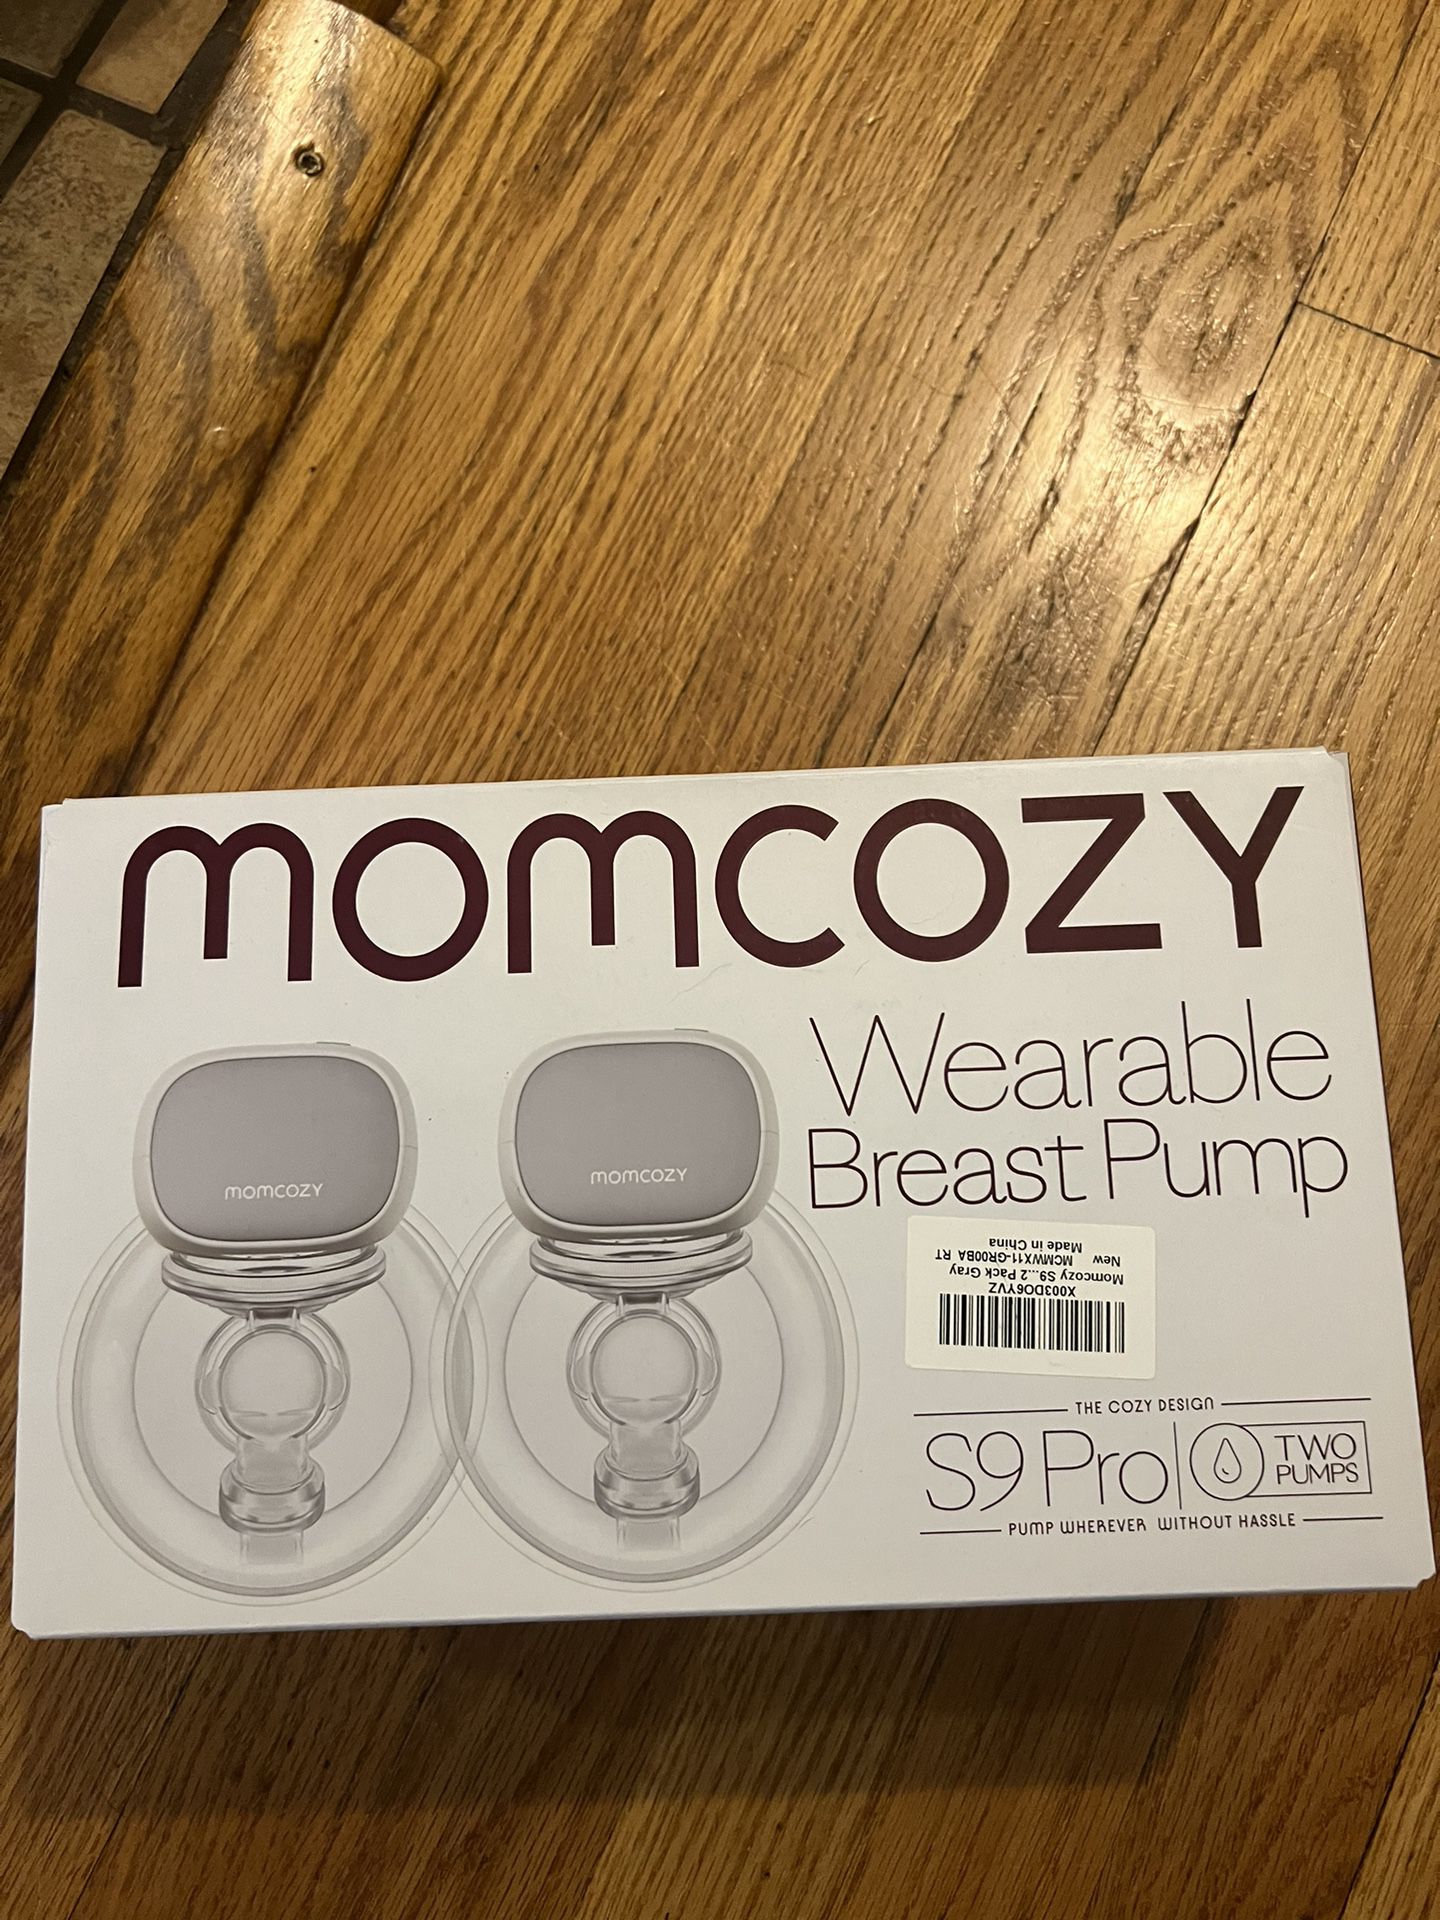 New In Unopened Box Momcozy S9 Pro Wearable Breast Pump, Hands